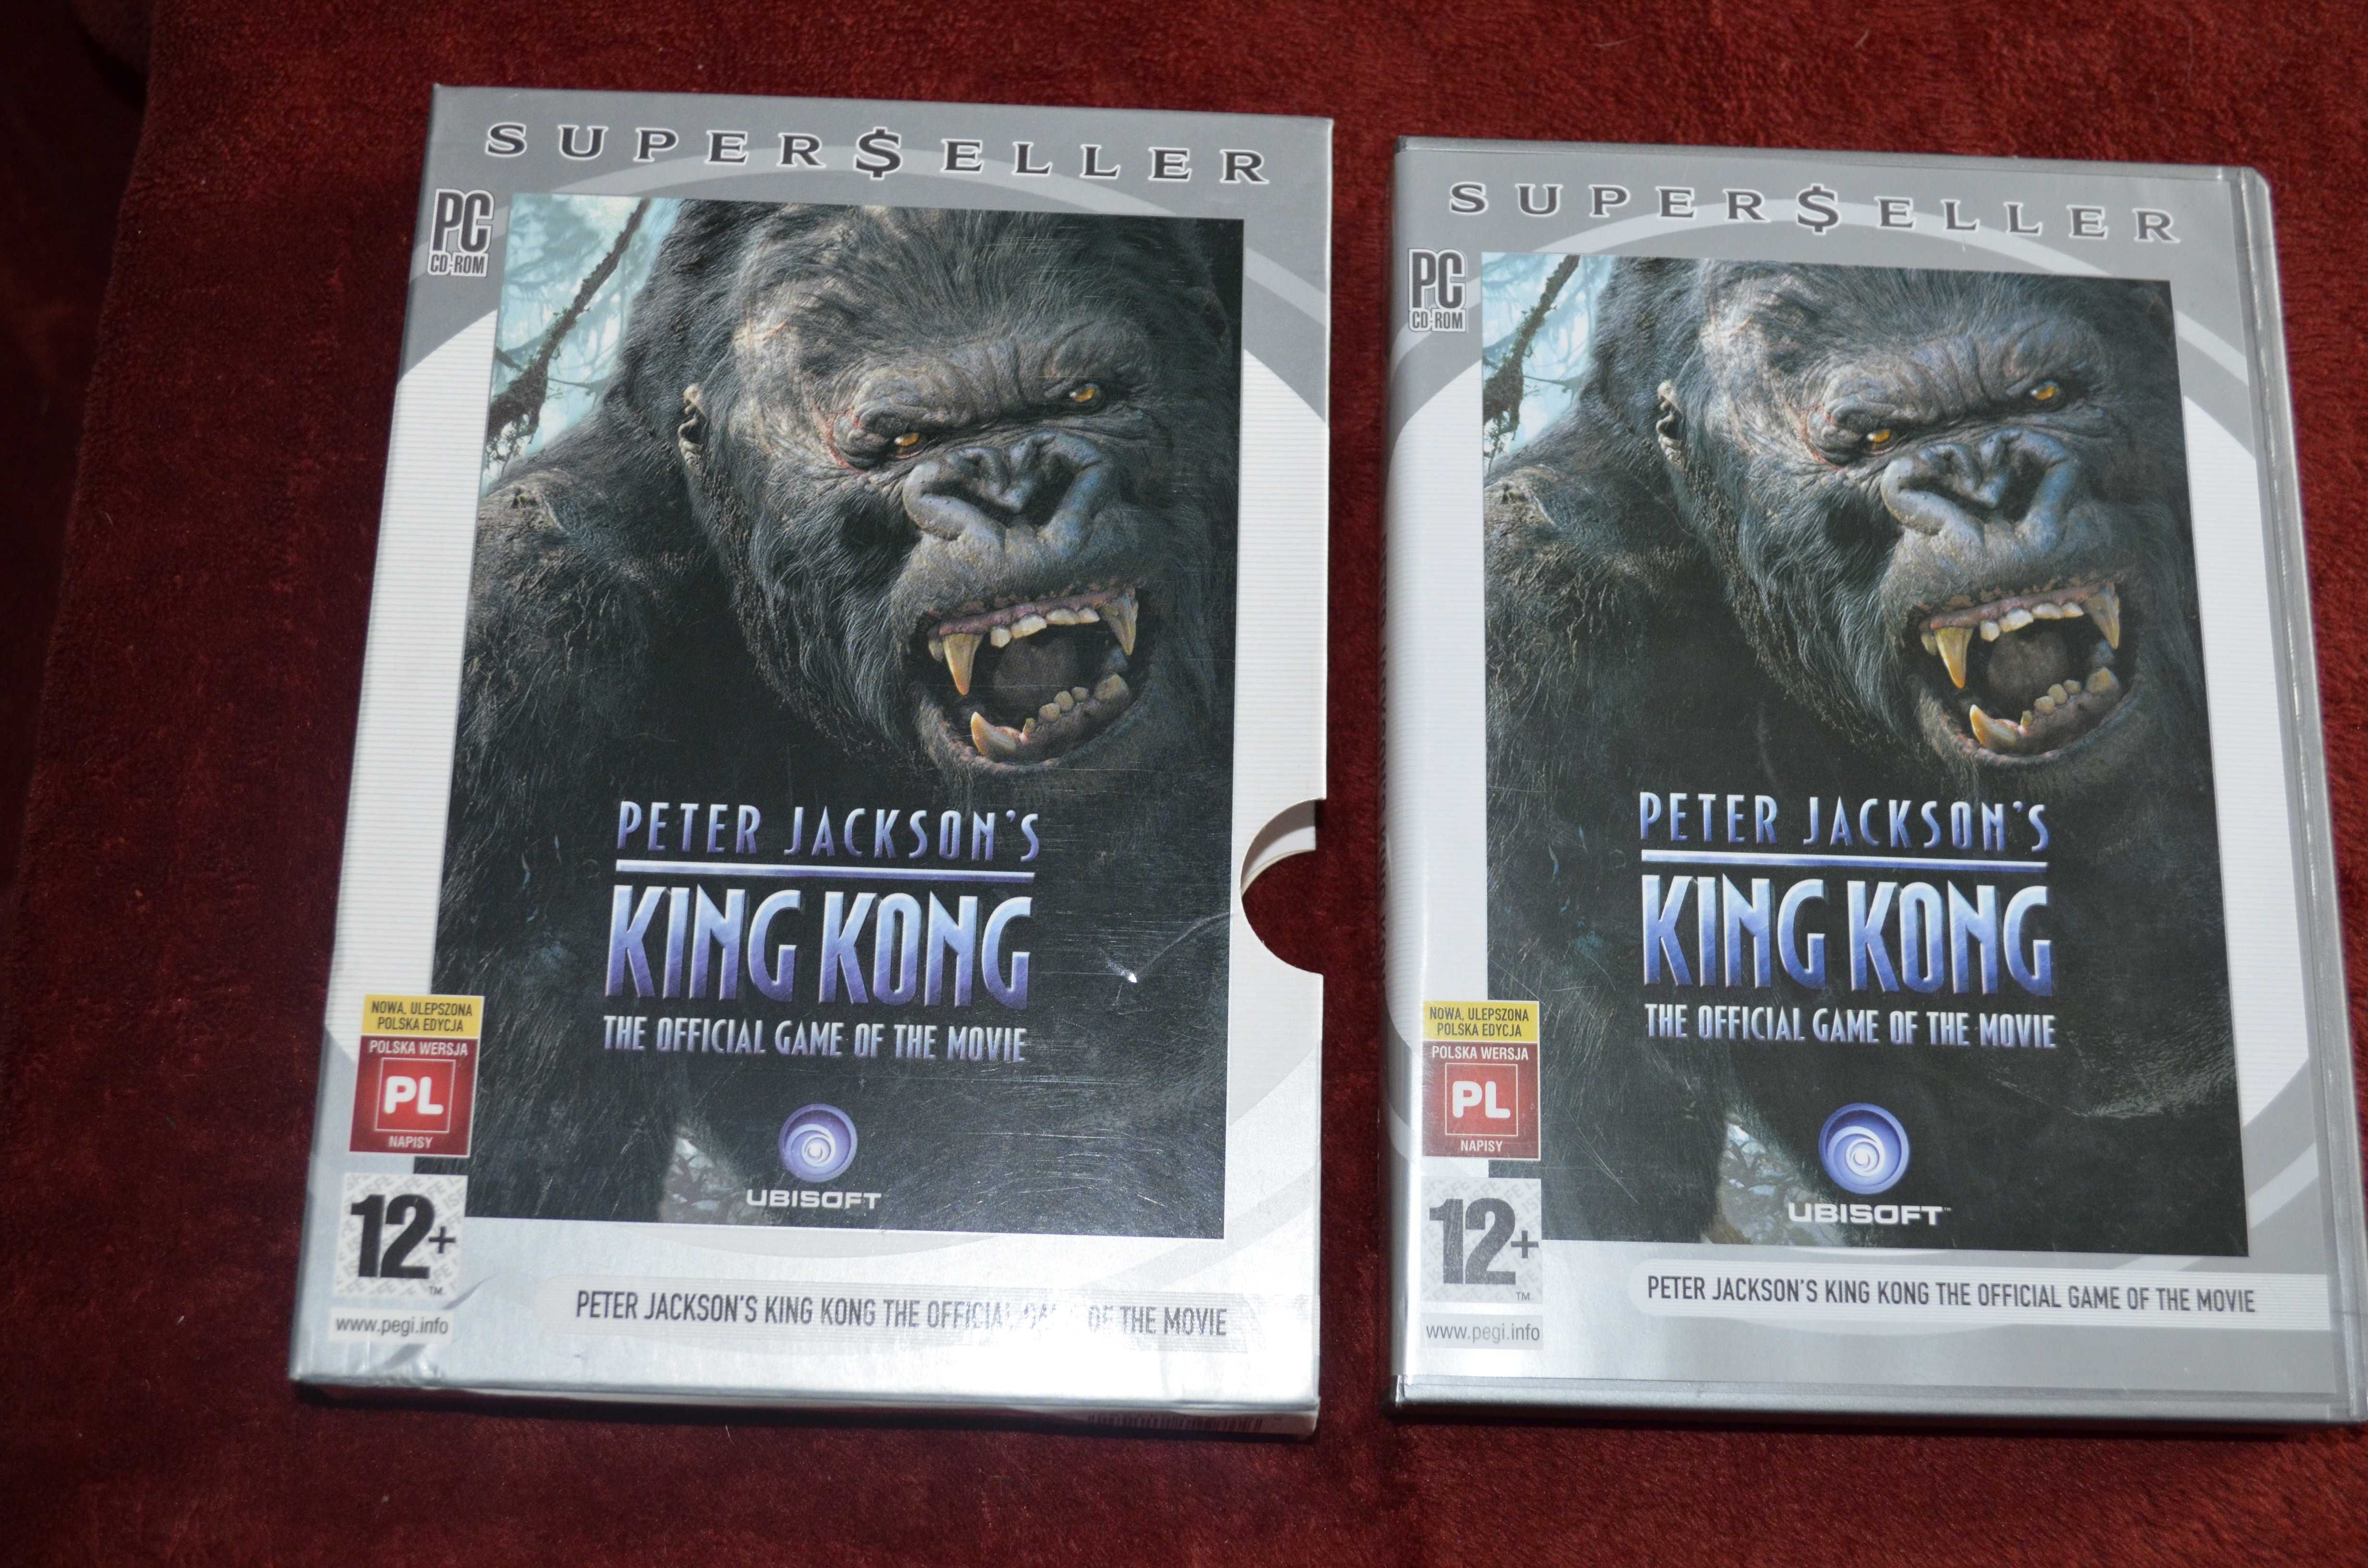 King Kong The Official Game of the Movie PC